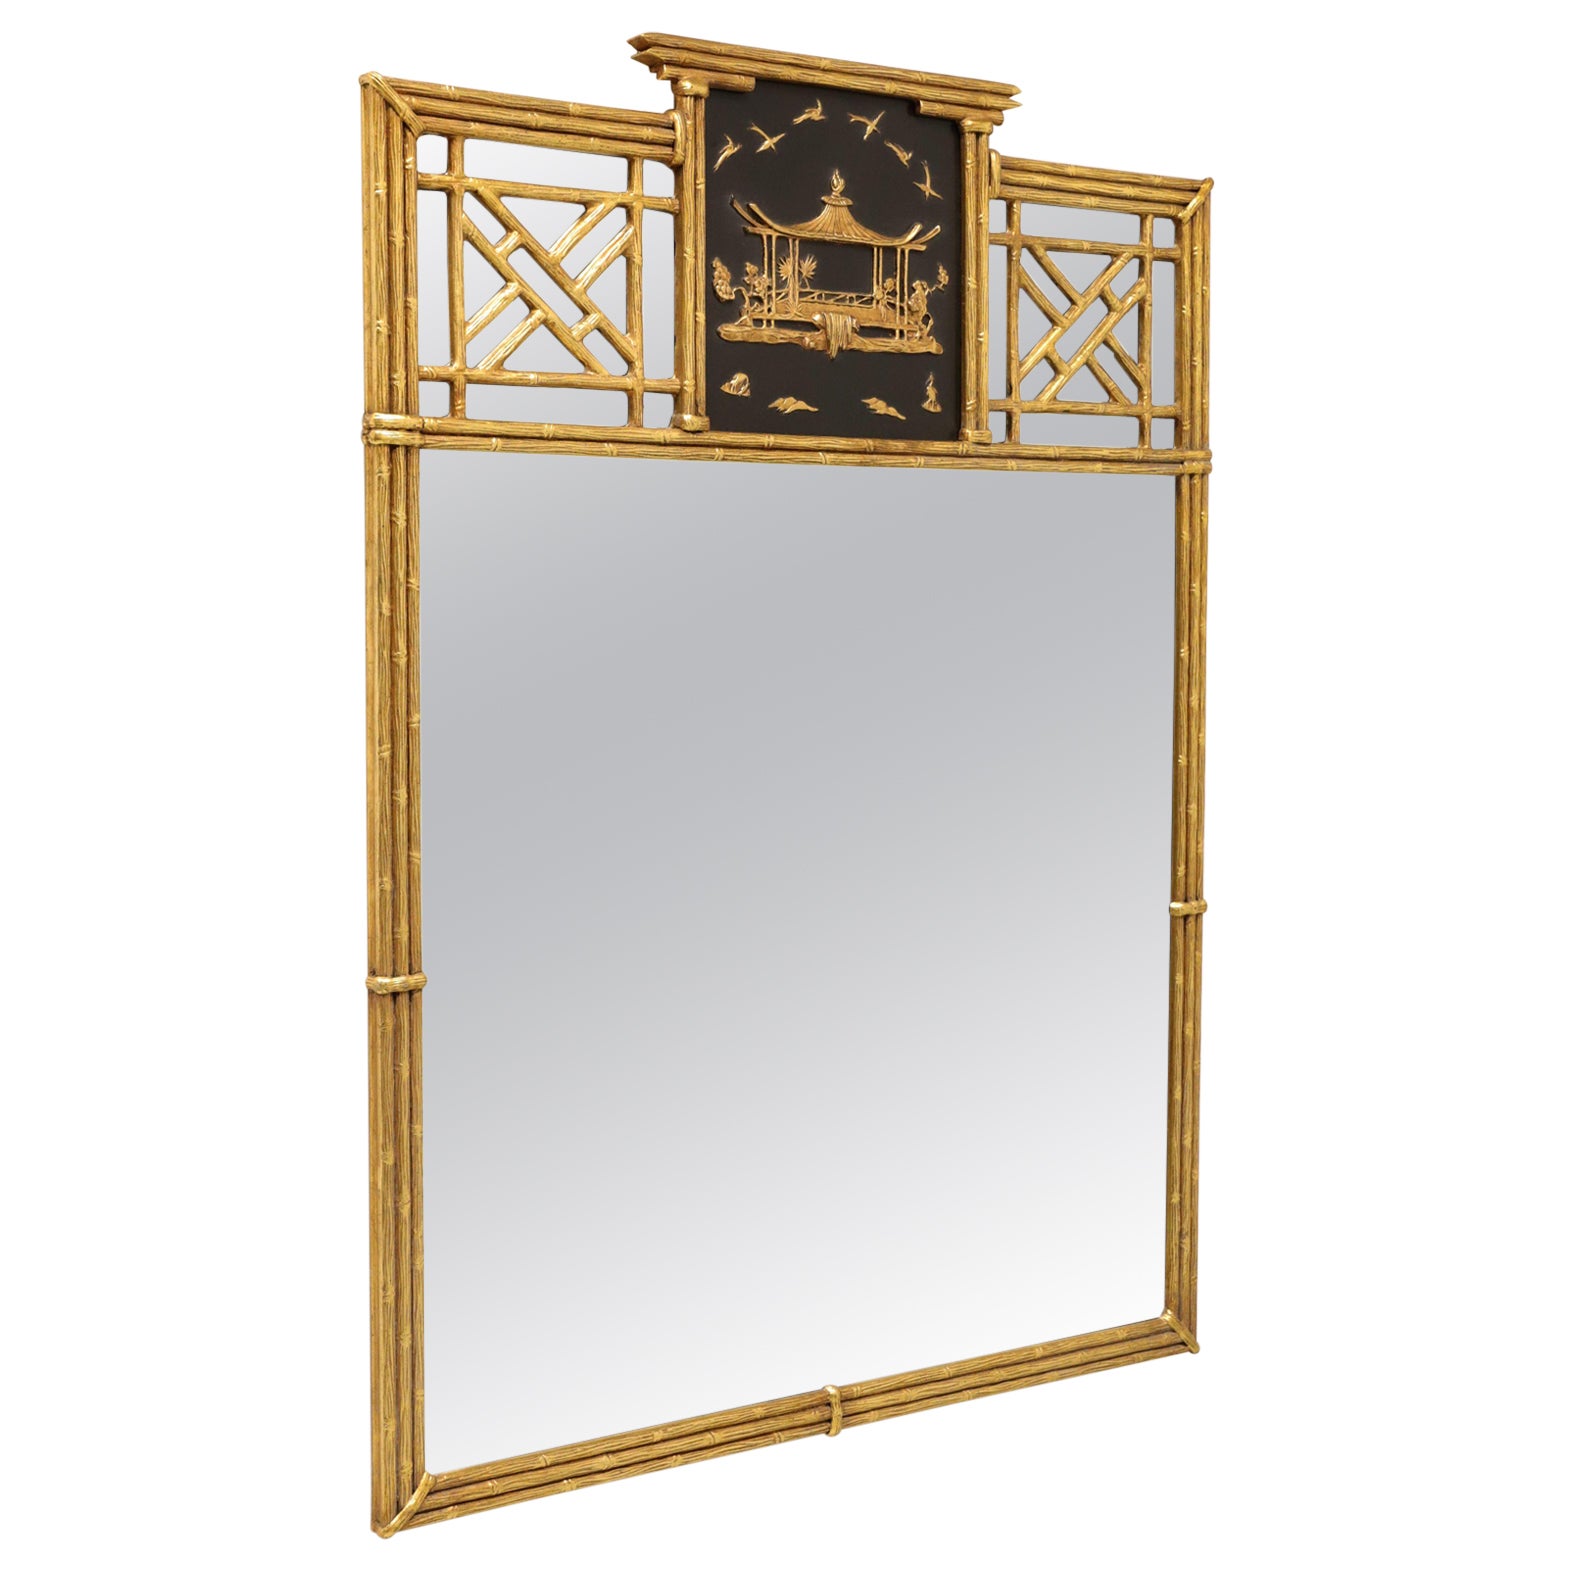 Faux Bamboo Mantel Mirrors and Fireplace Mirrors